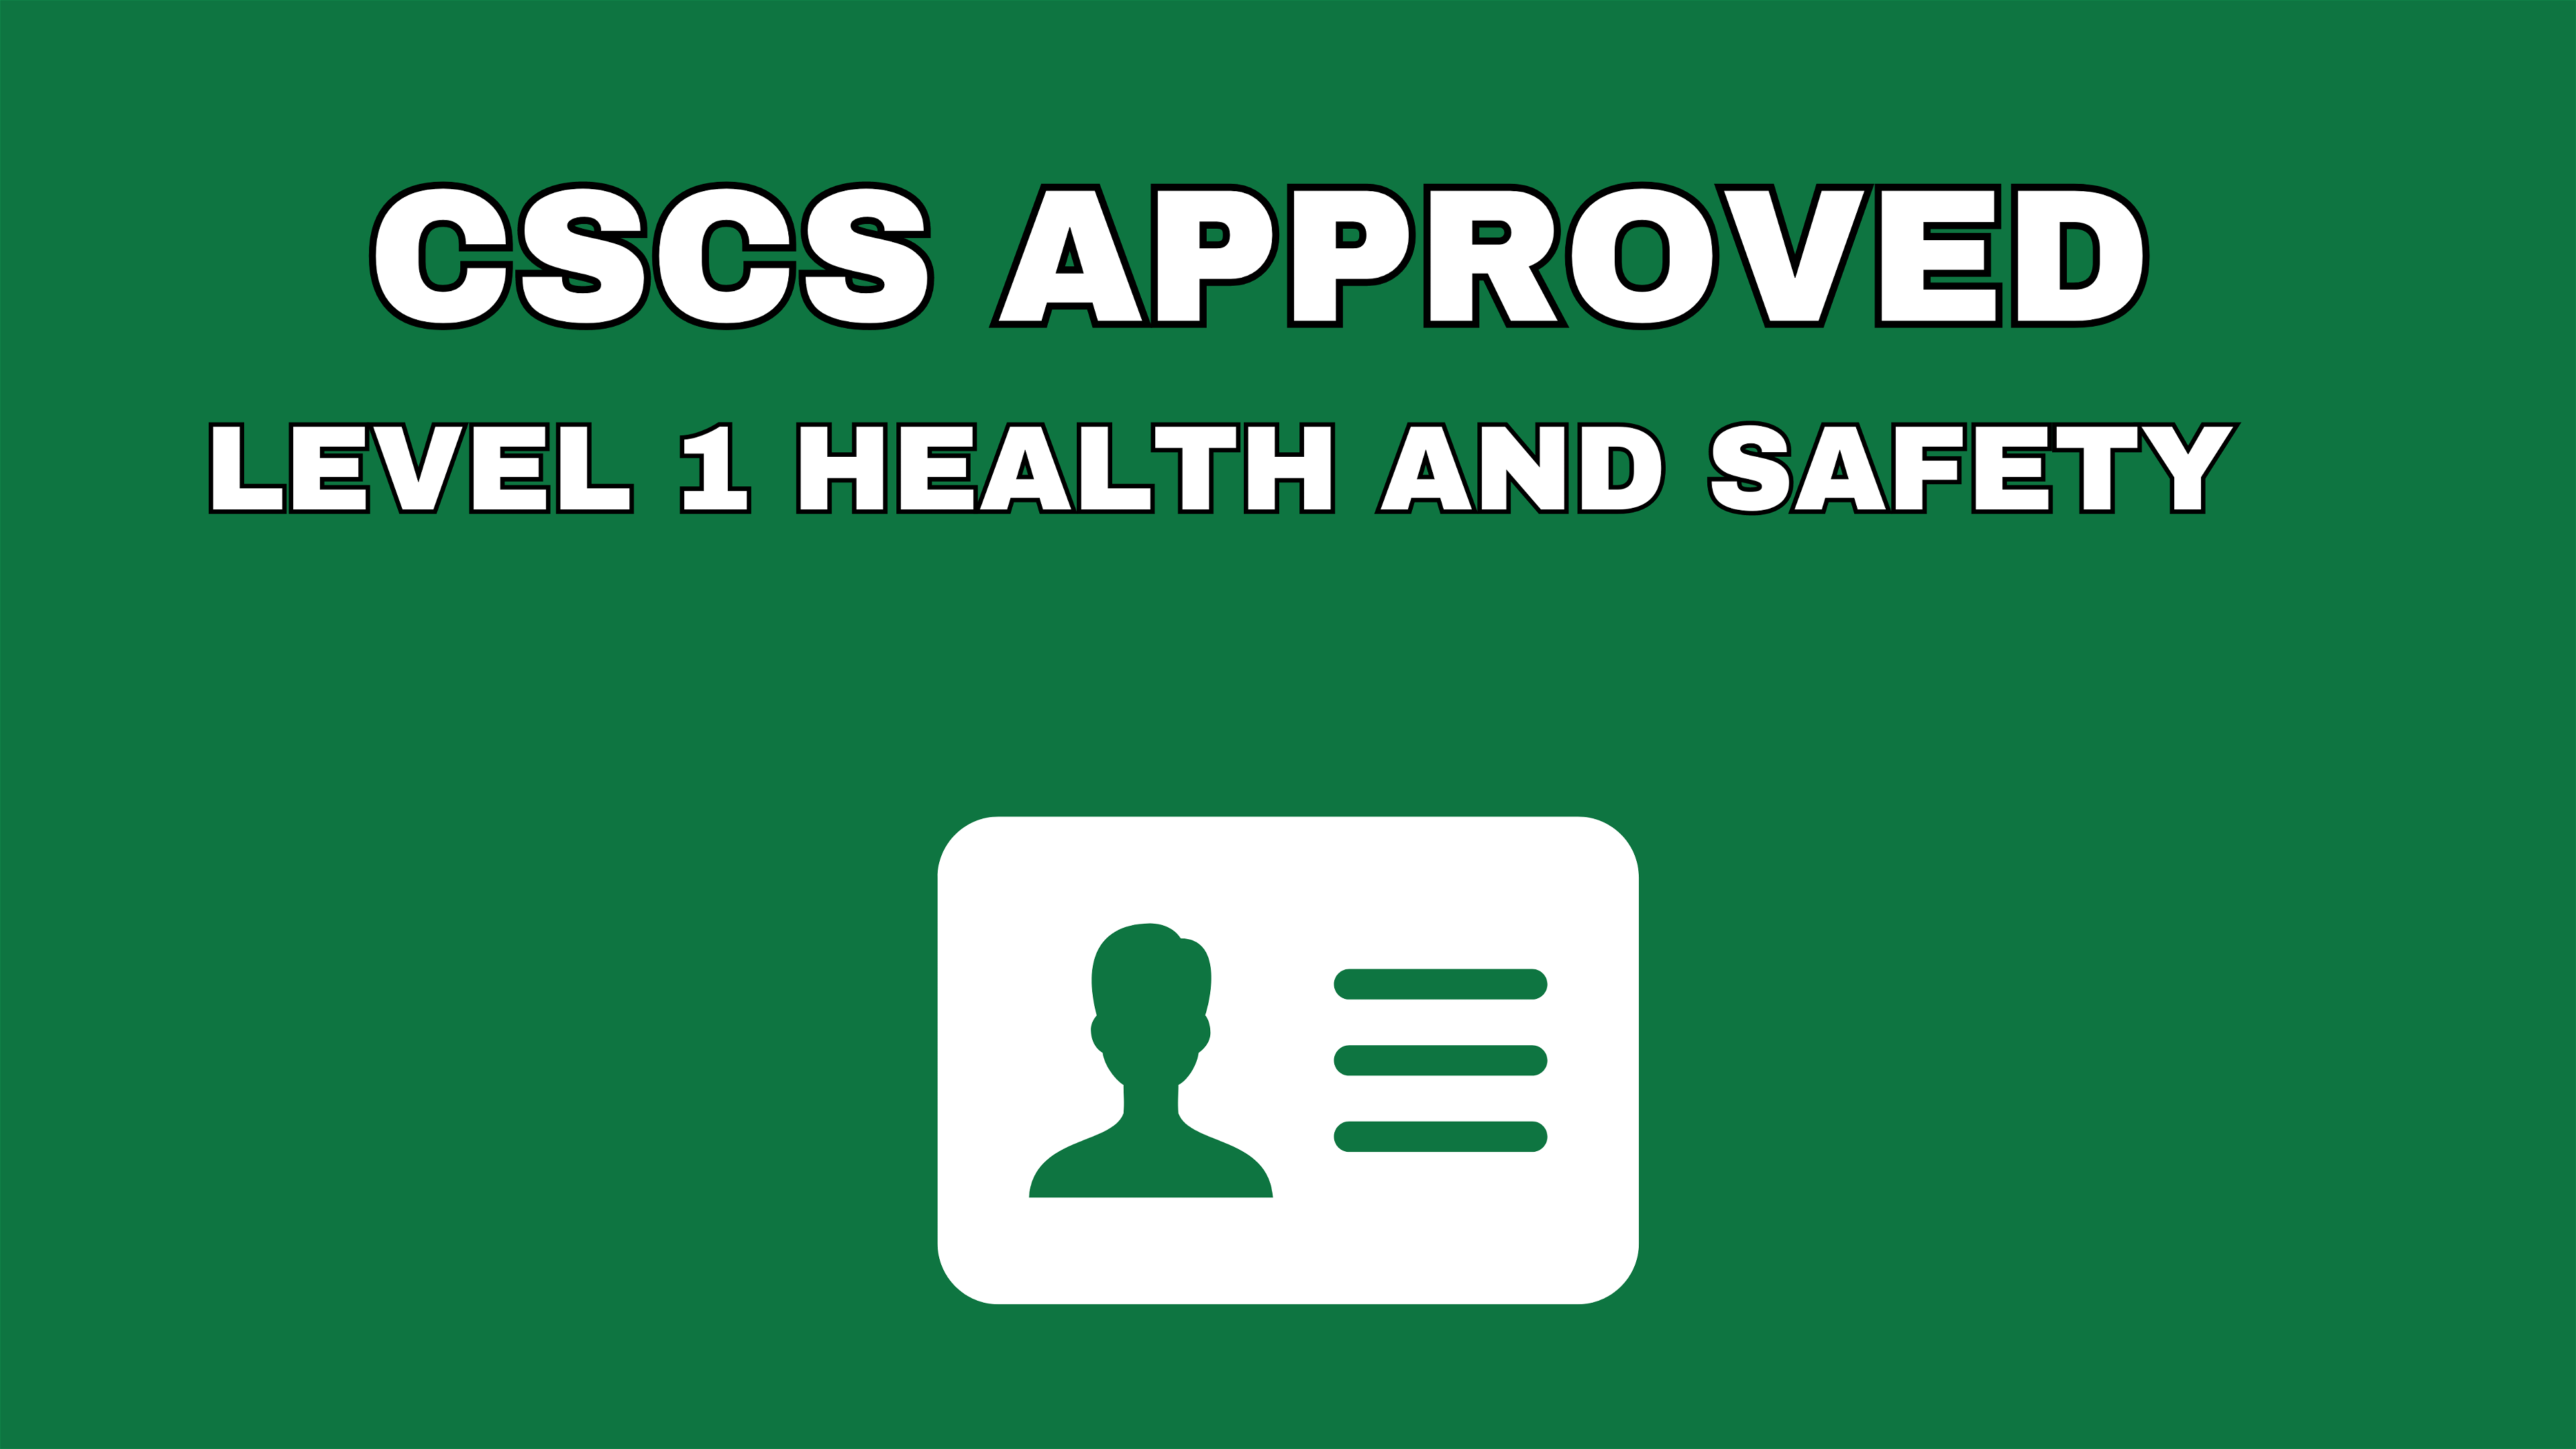 Level 1 Health and Safety for CSCS